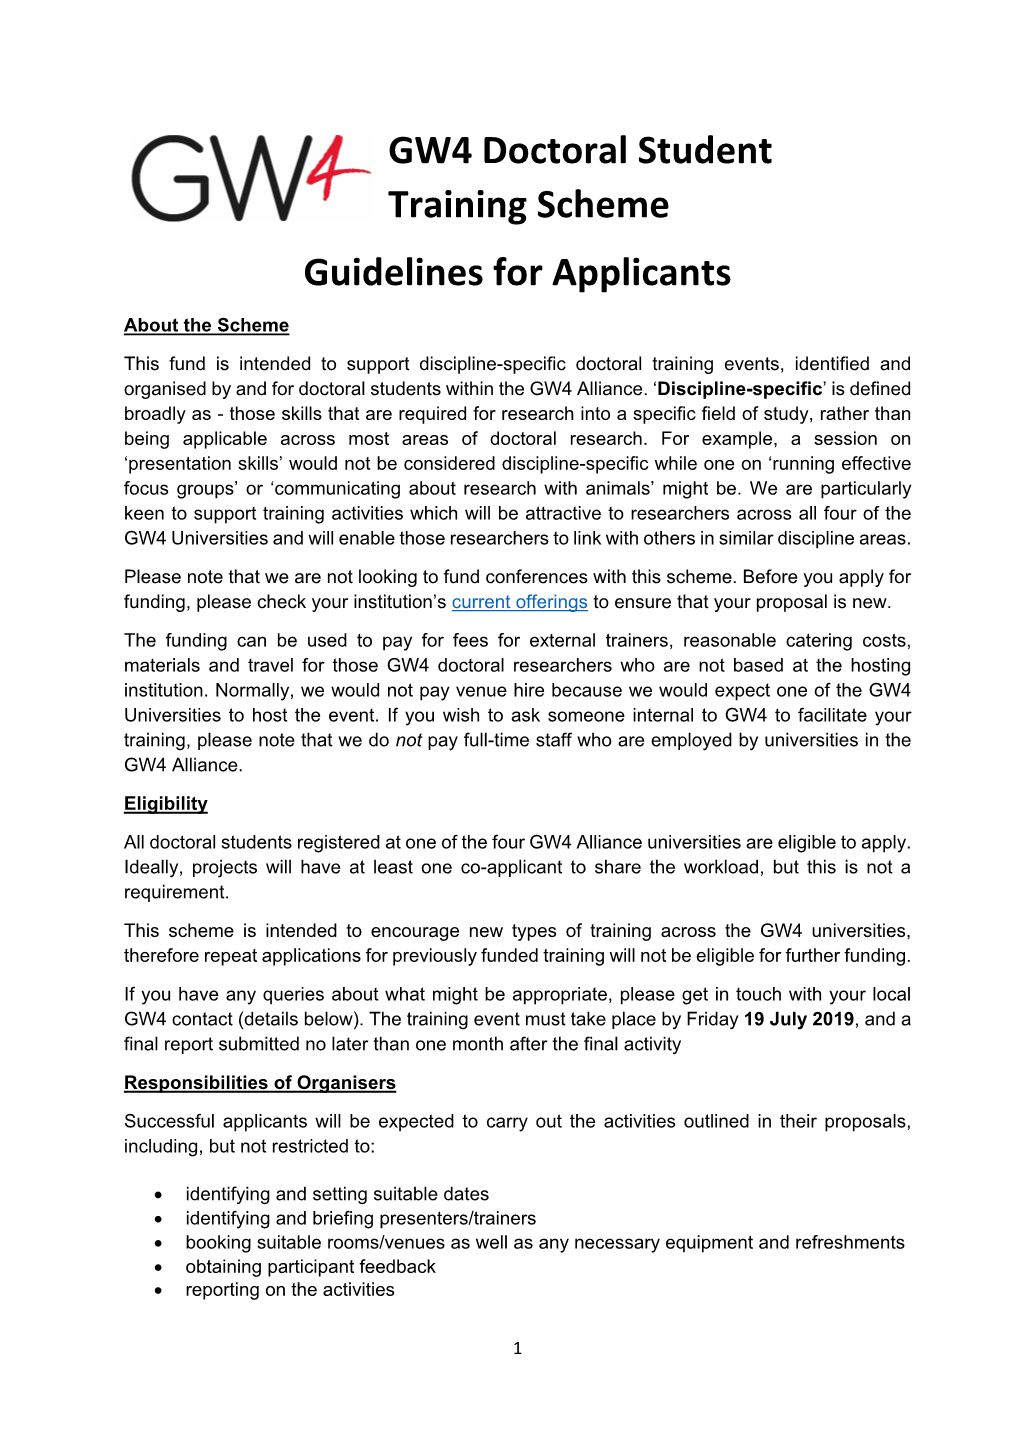 GW4 Doctoral Student Training Scheme Guidelines for Applicants